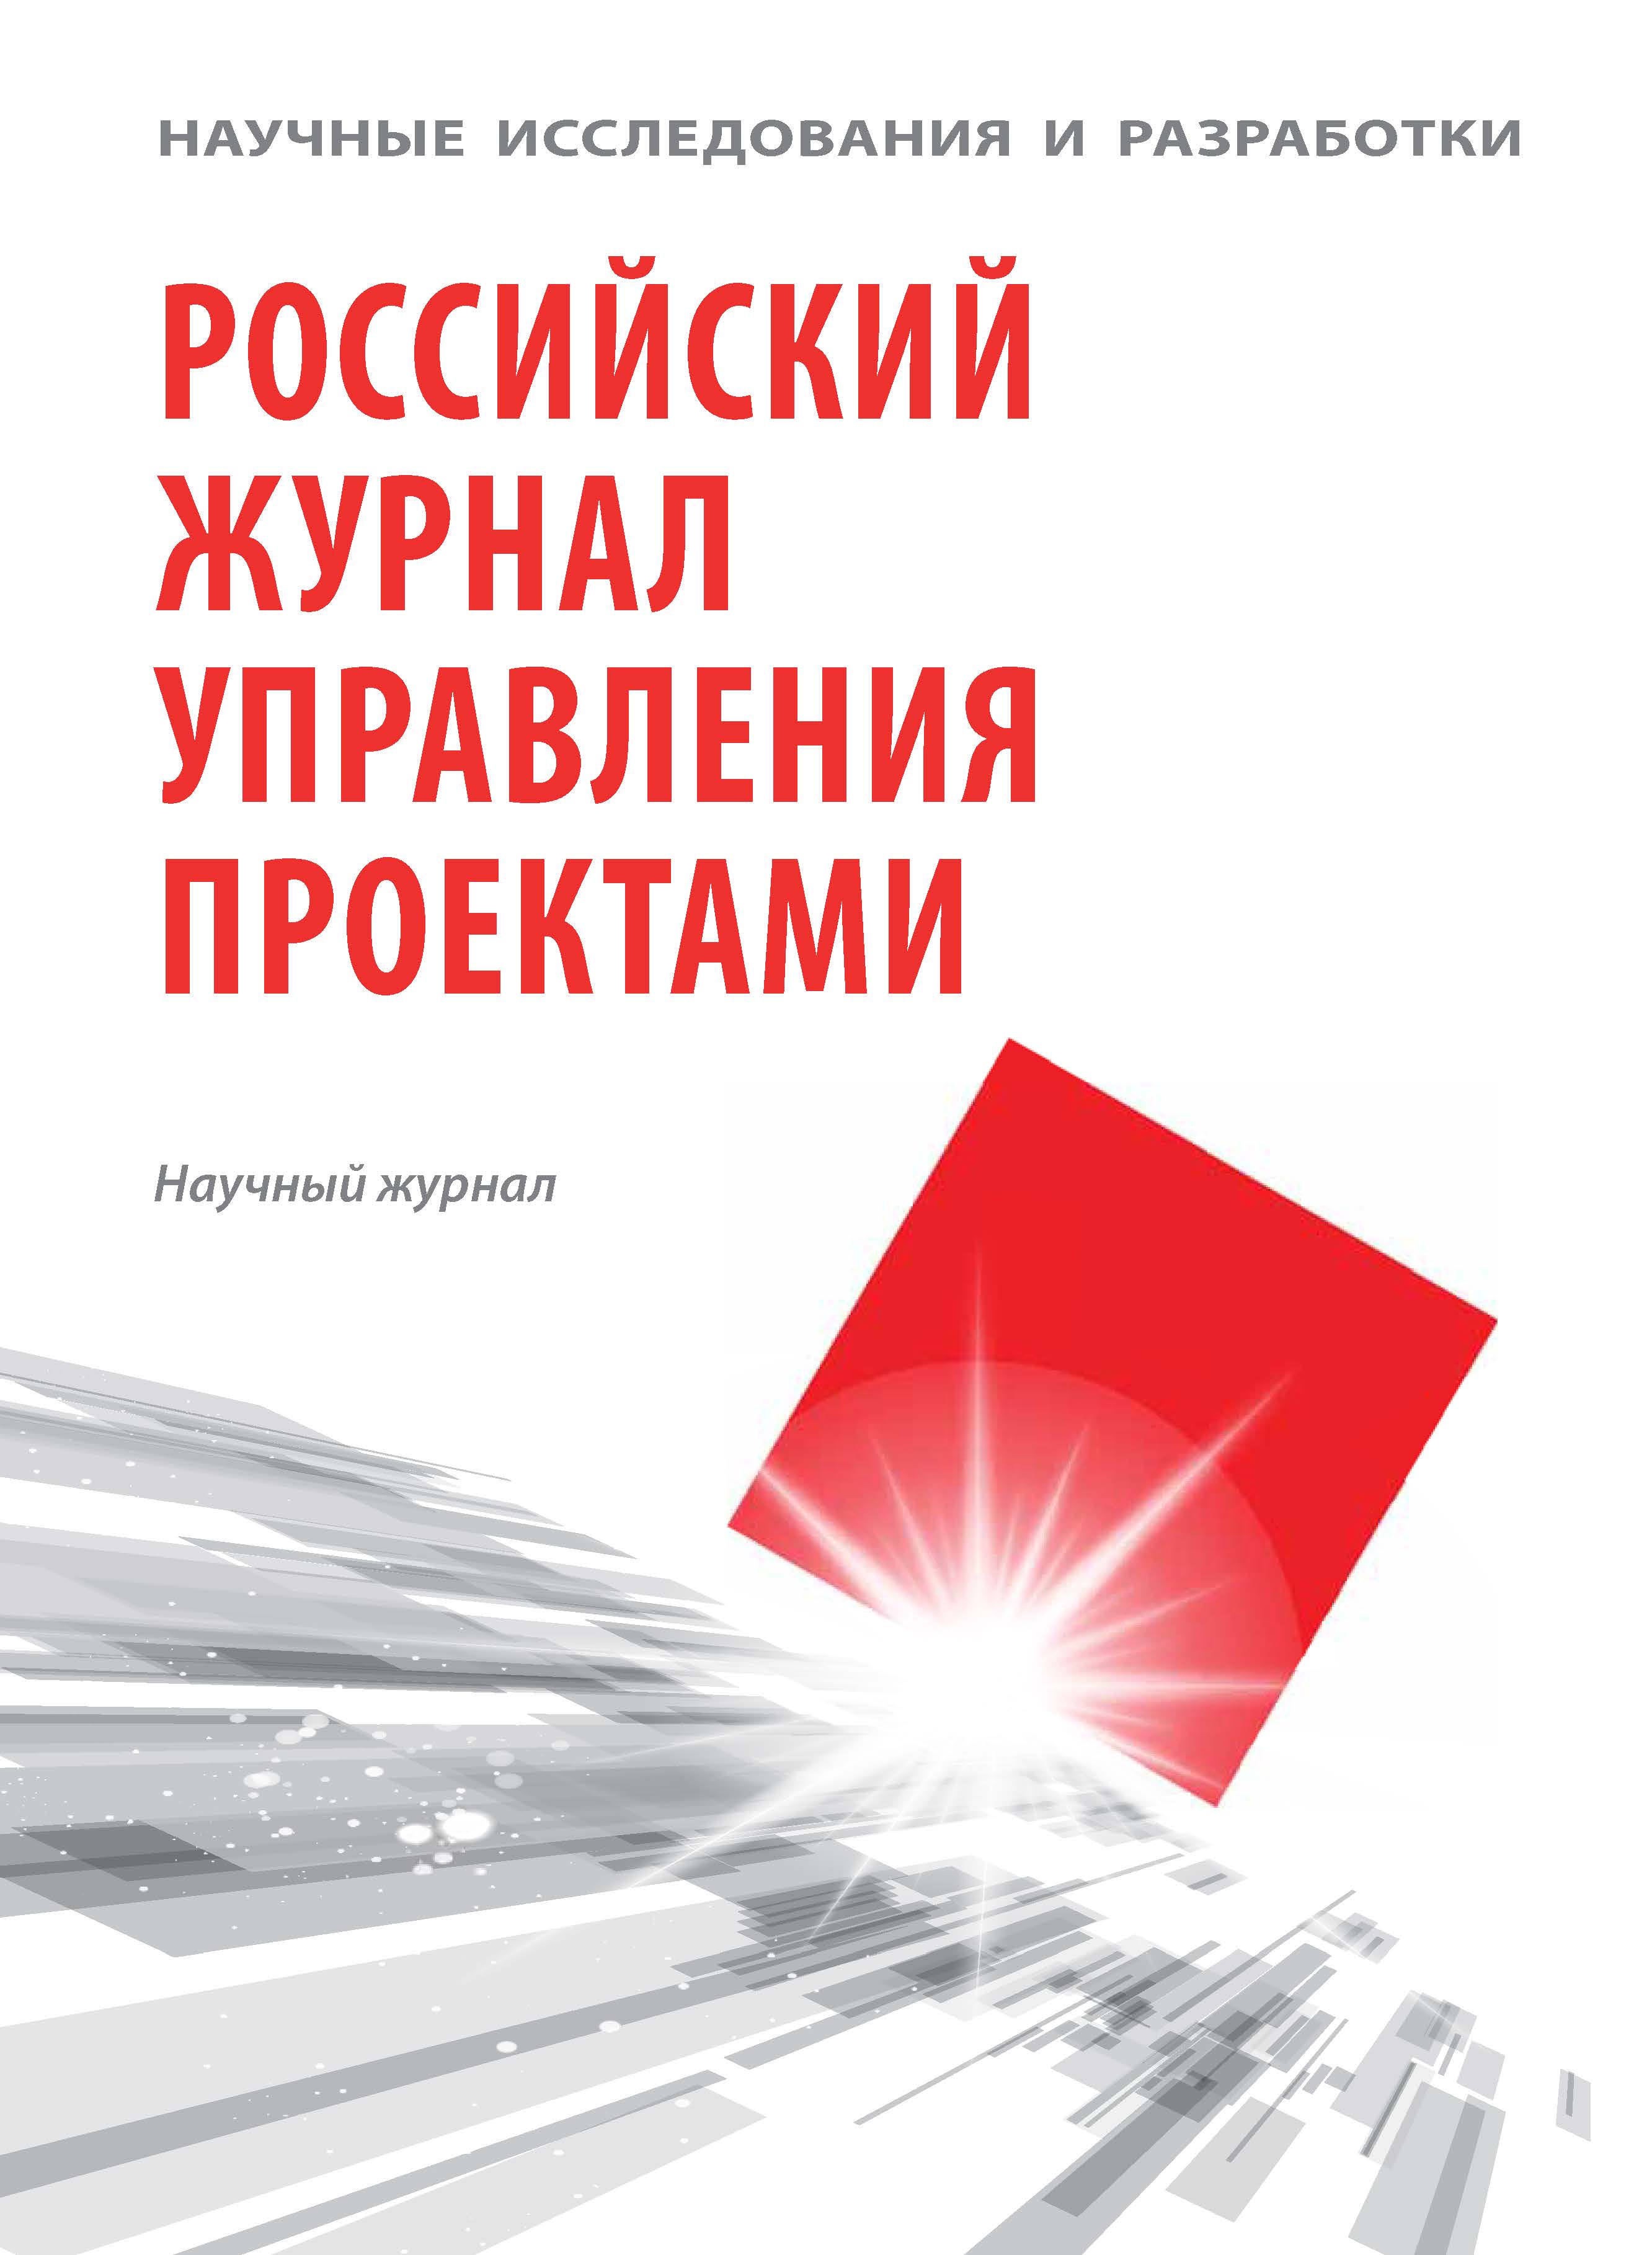                         Lean Project Management: Experience of Russian Organizations and Efficiency Assessment
            